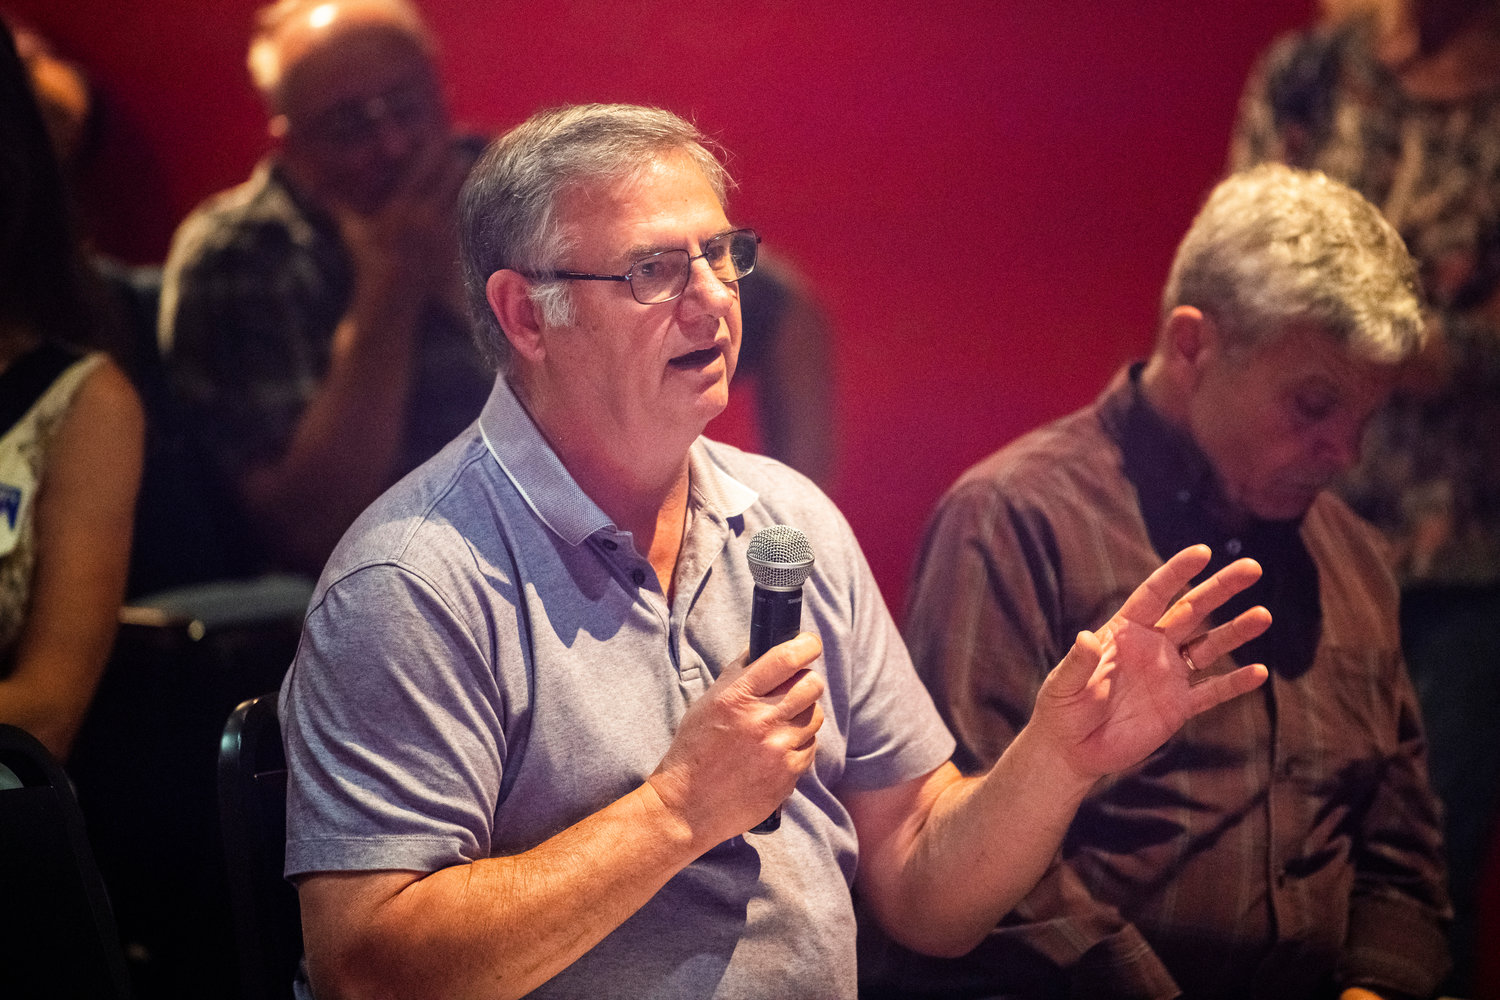 Mossyrock Mayor Randall Sasser asks questions to candidates at the Roxy Theater Tuesday in Morton.